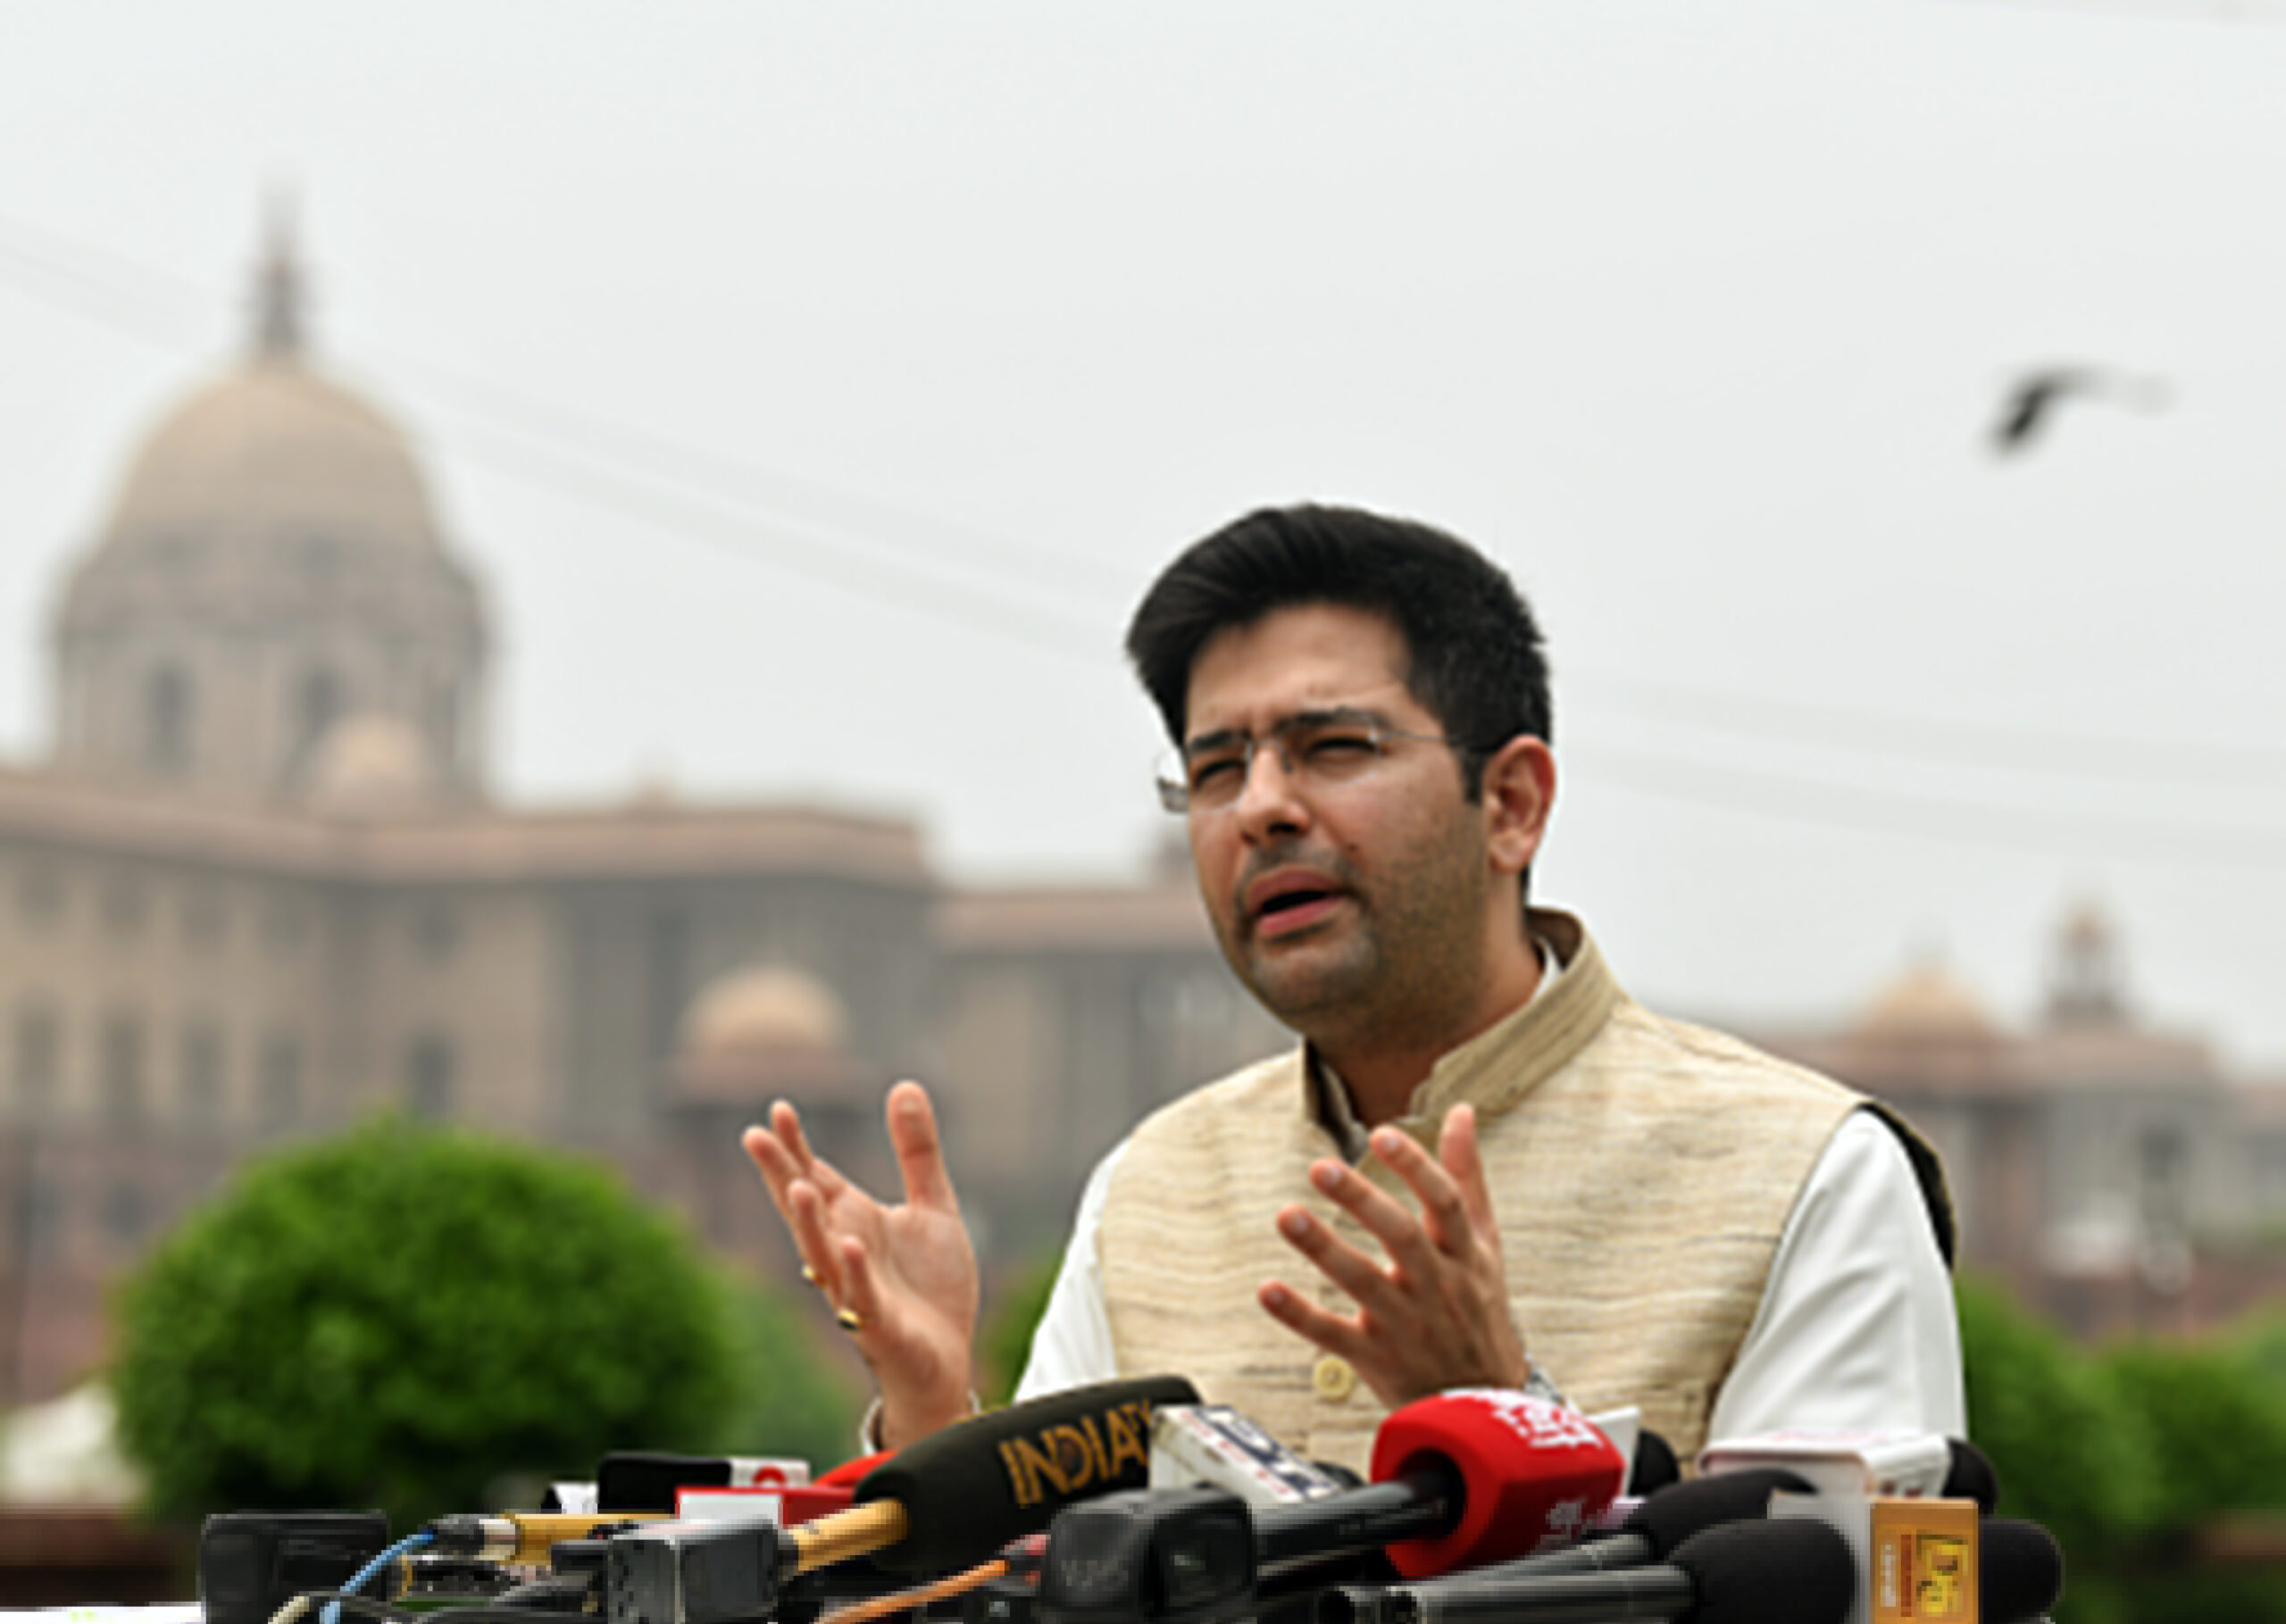 AAP MP Raghav Chadha says Urges Discussion on Parliament Security Breach remarks- ‘If Parliament is not safe, then is the country safe?’